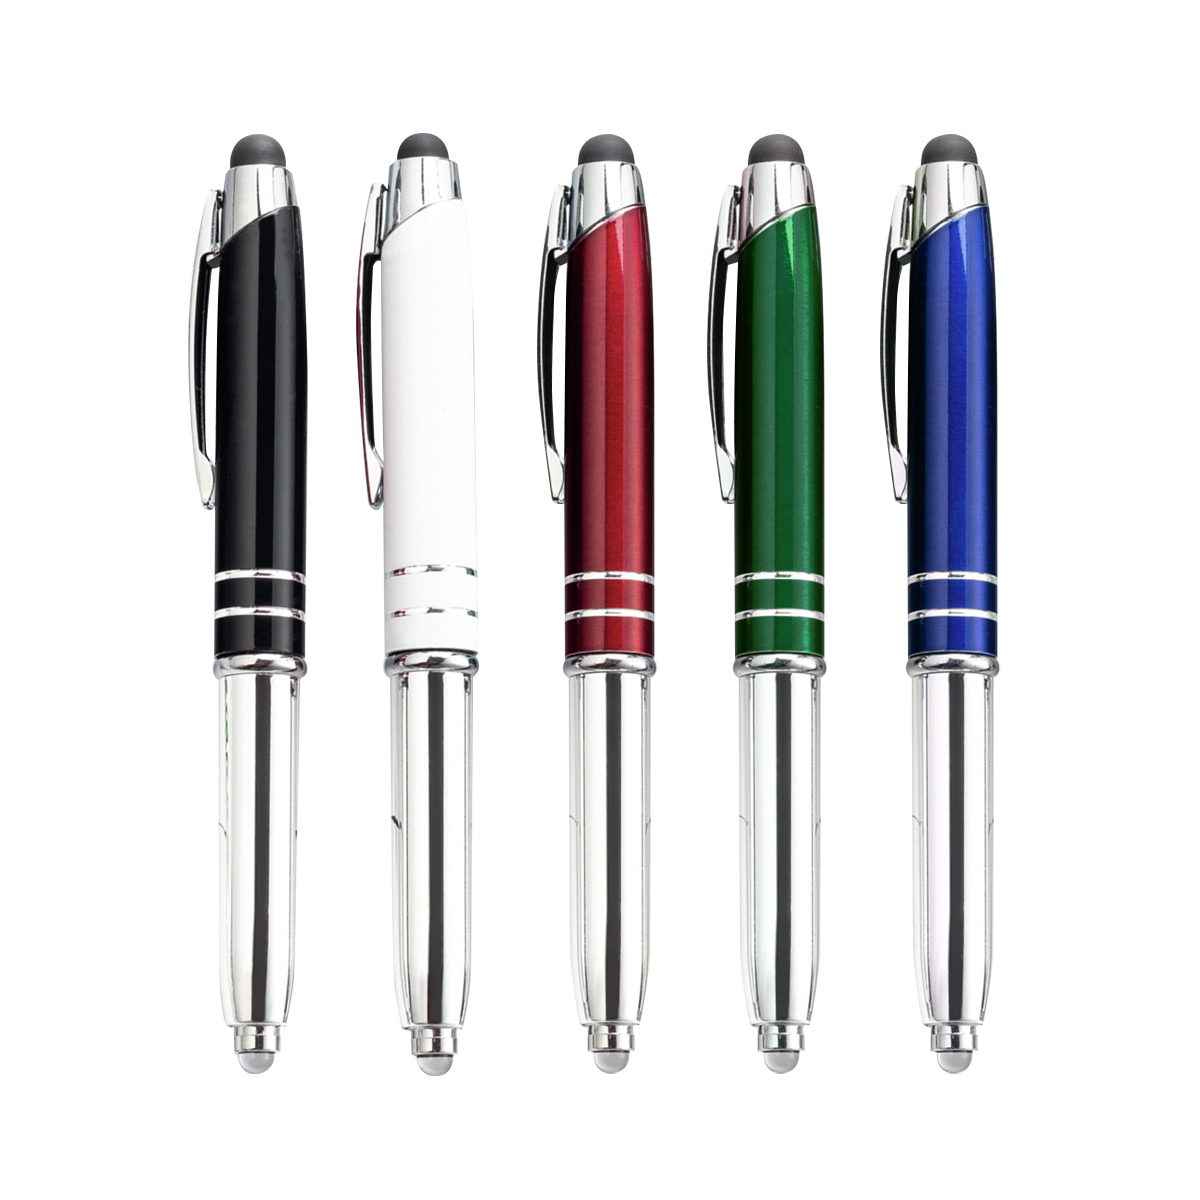 3 in 1 Stylus Metal Pen with LED